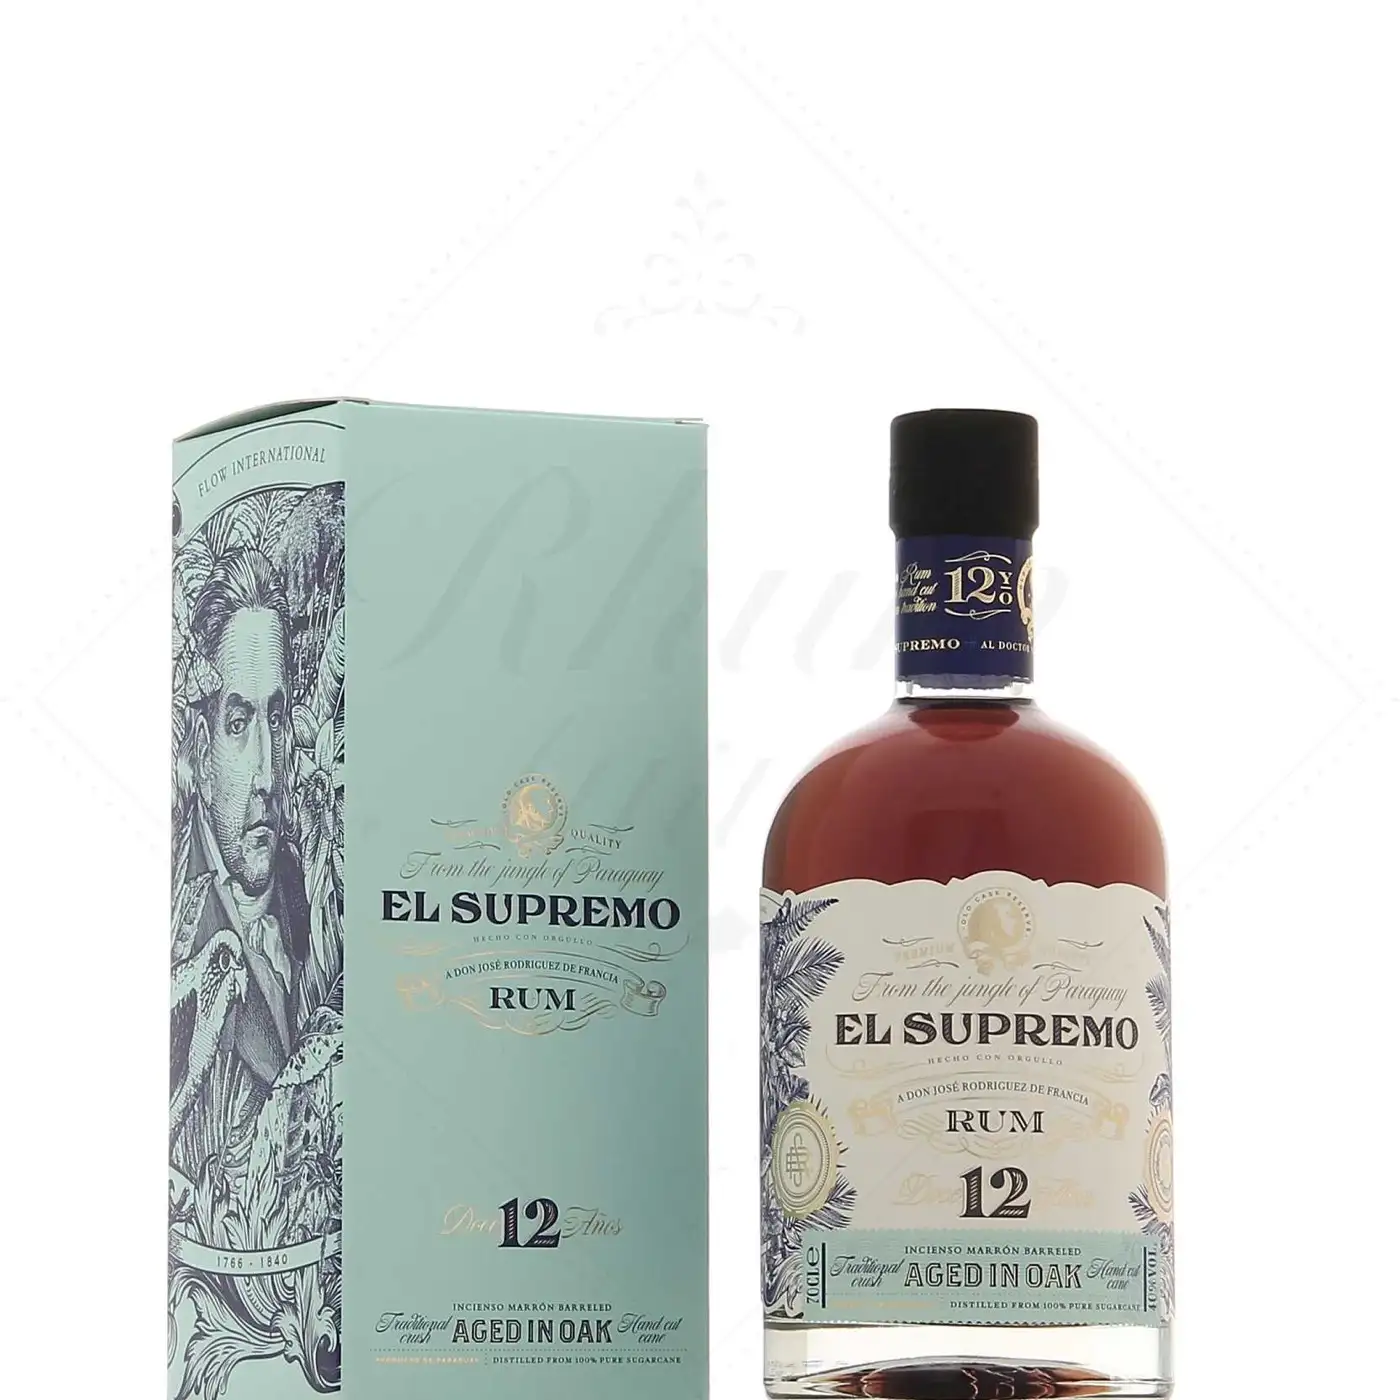 Image of the front of the bottle of the rum El Supremo 12 Años